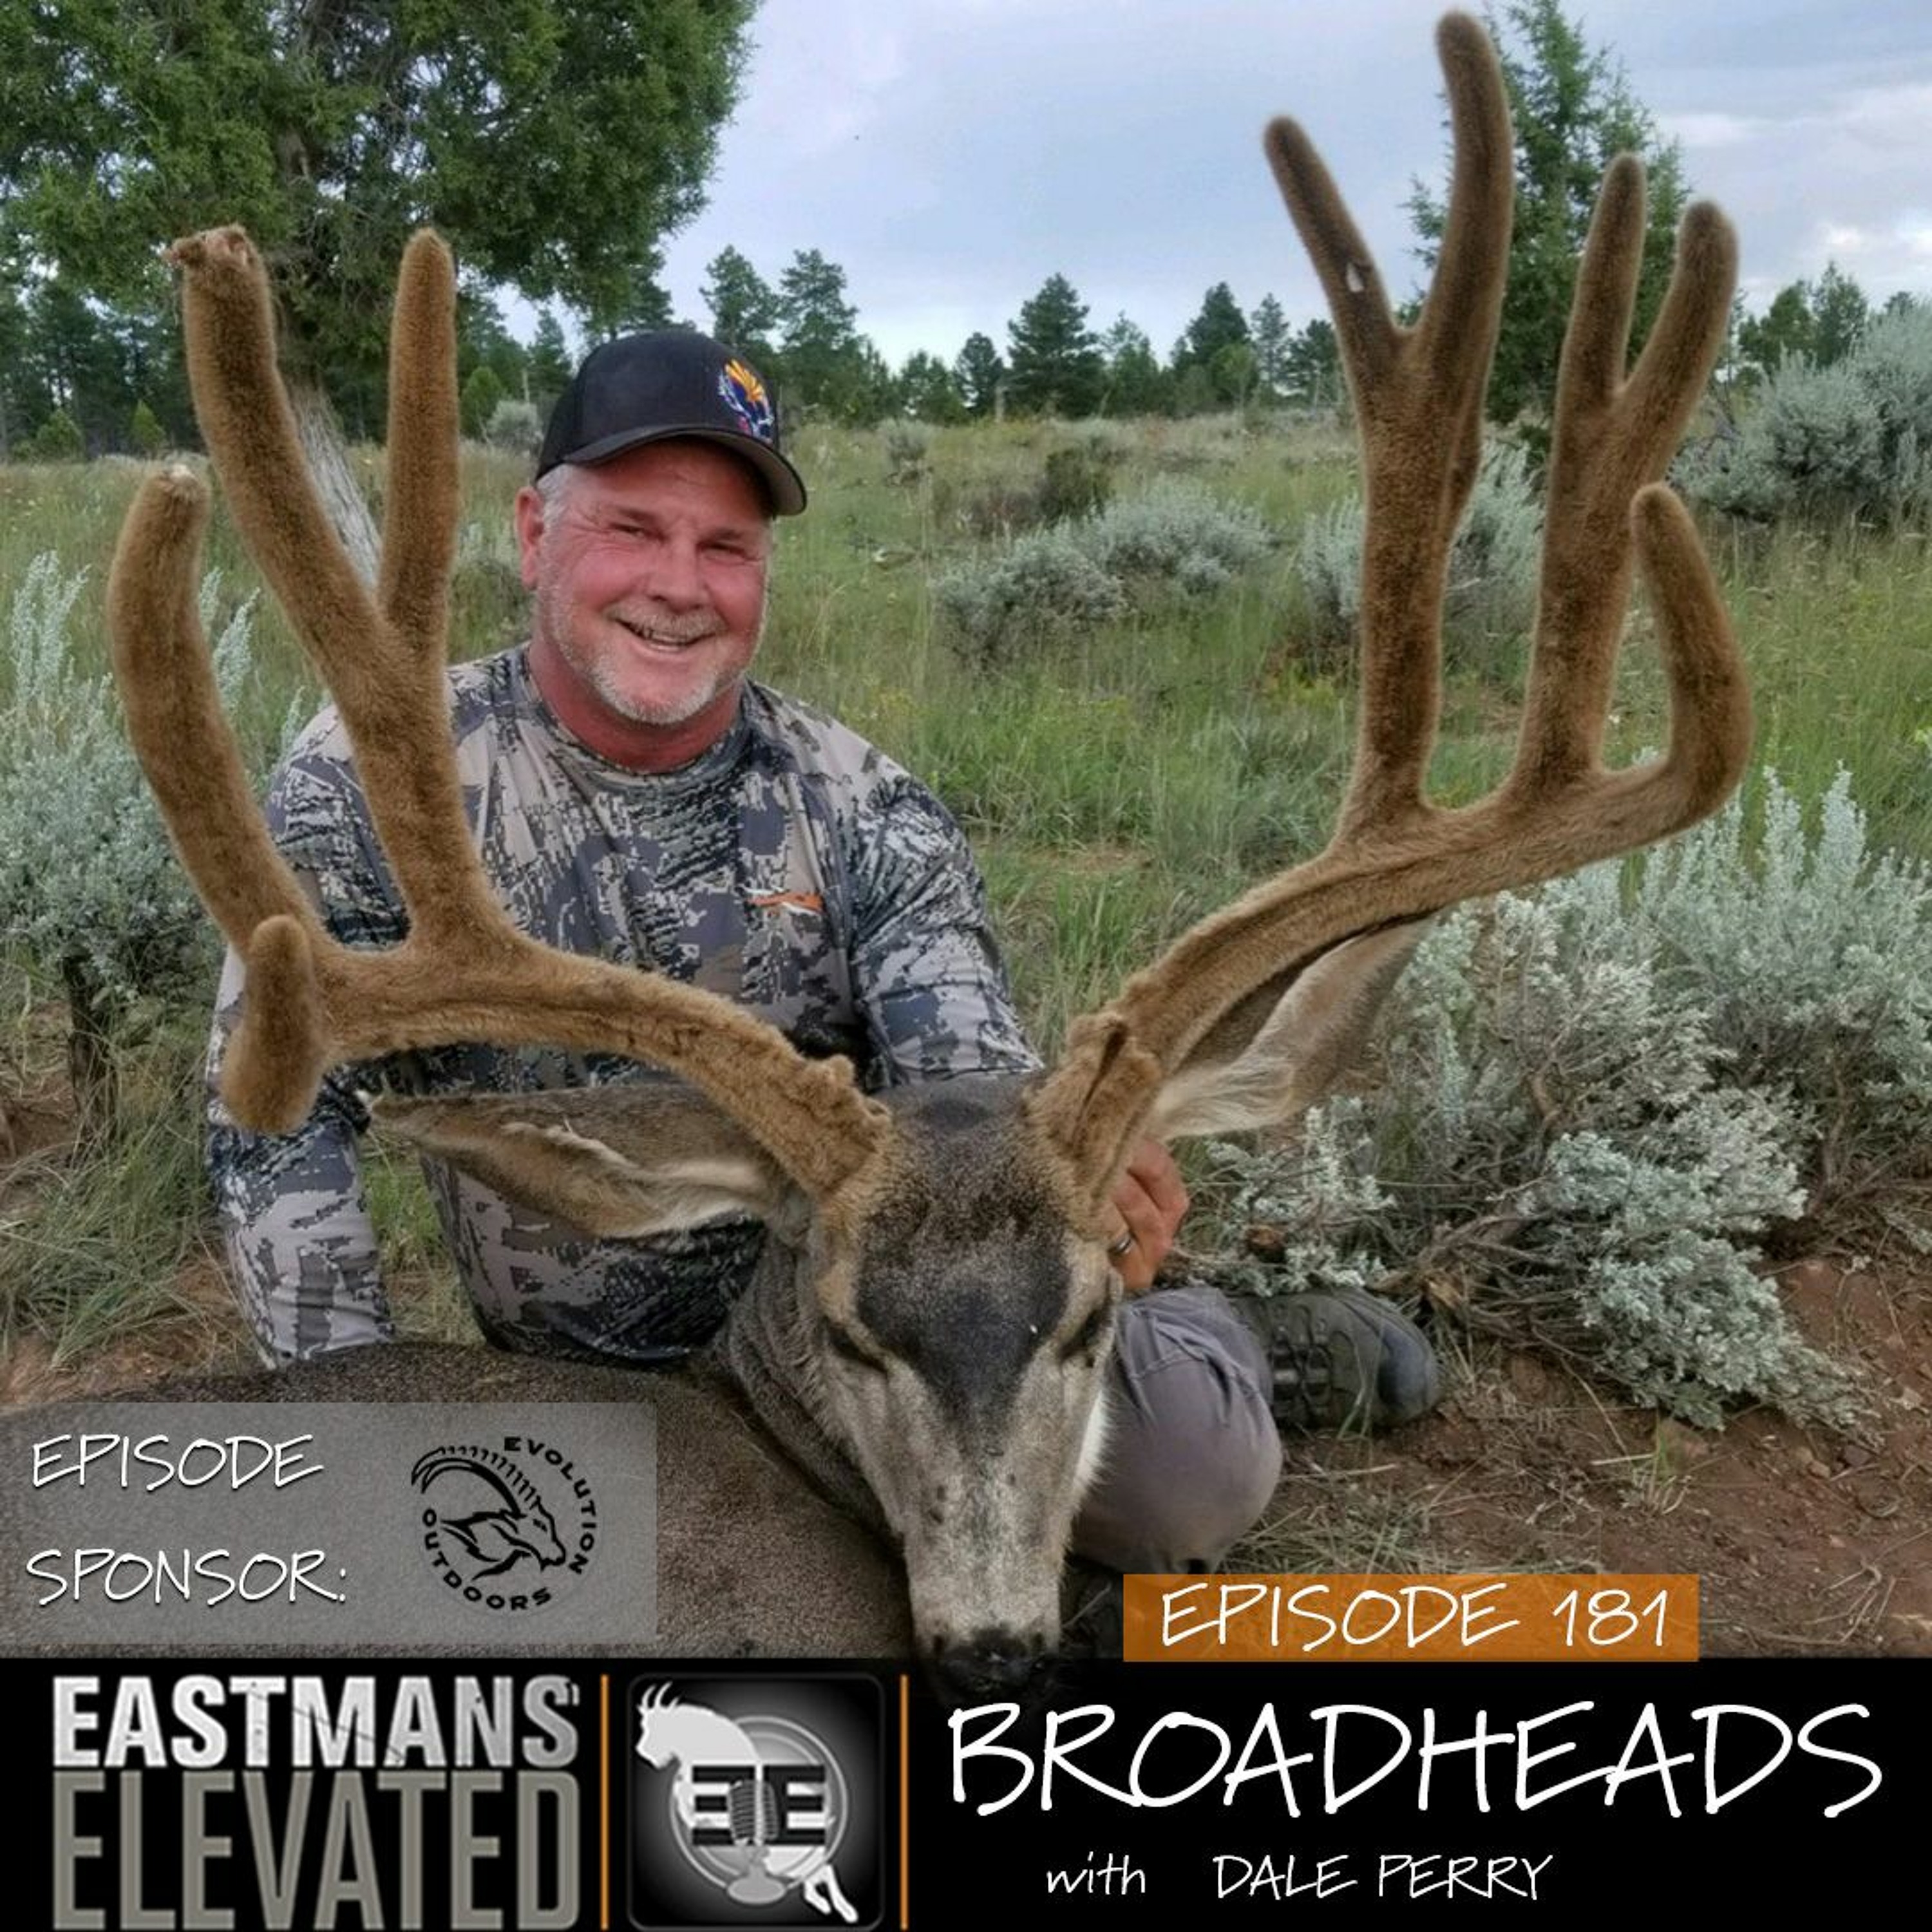 Episode 181: Broadheads with Dale Perry